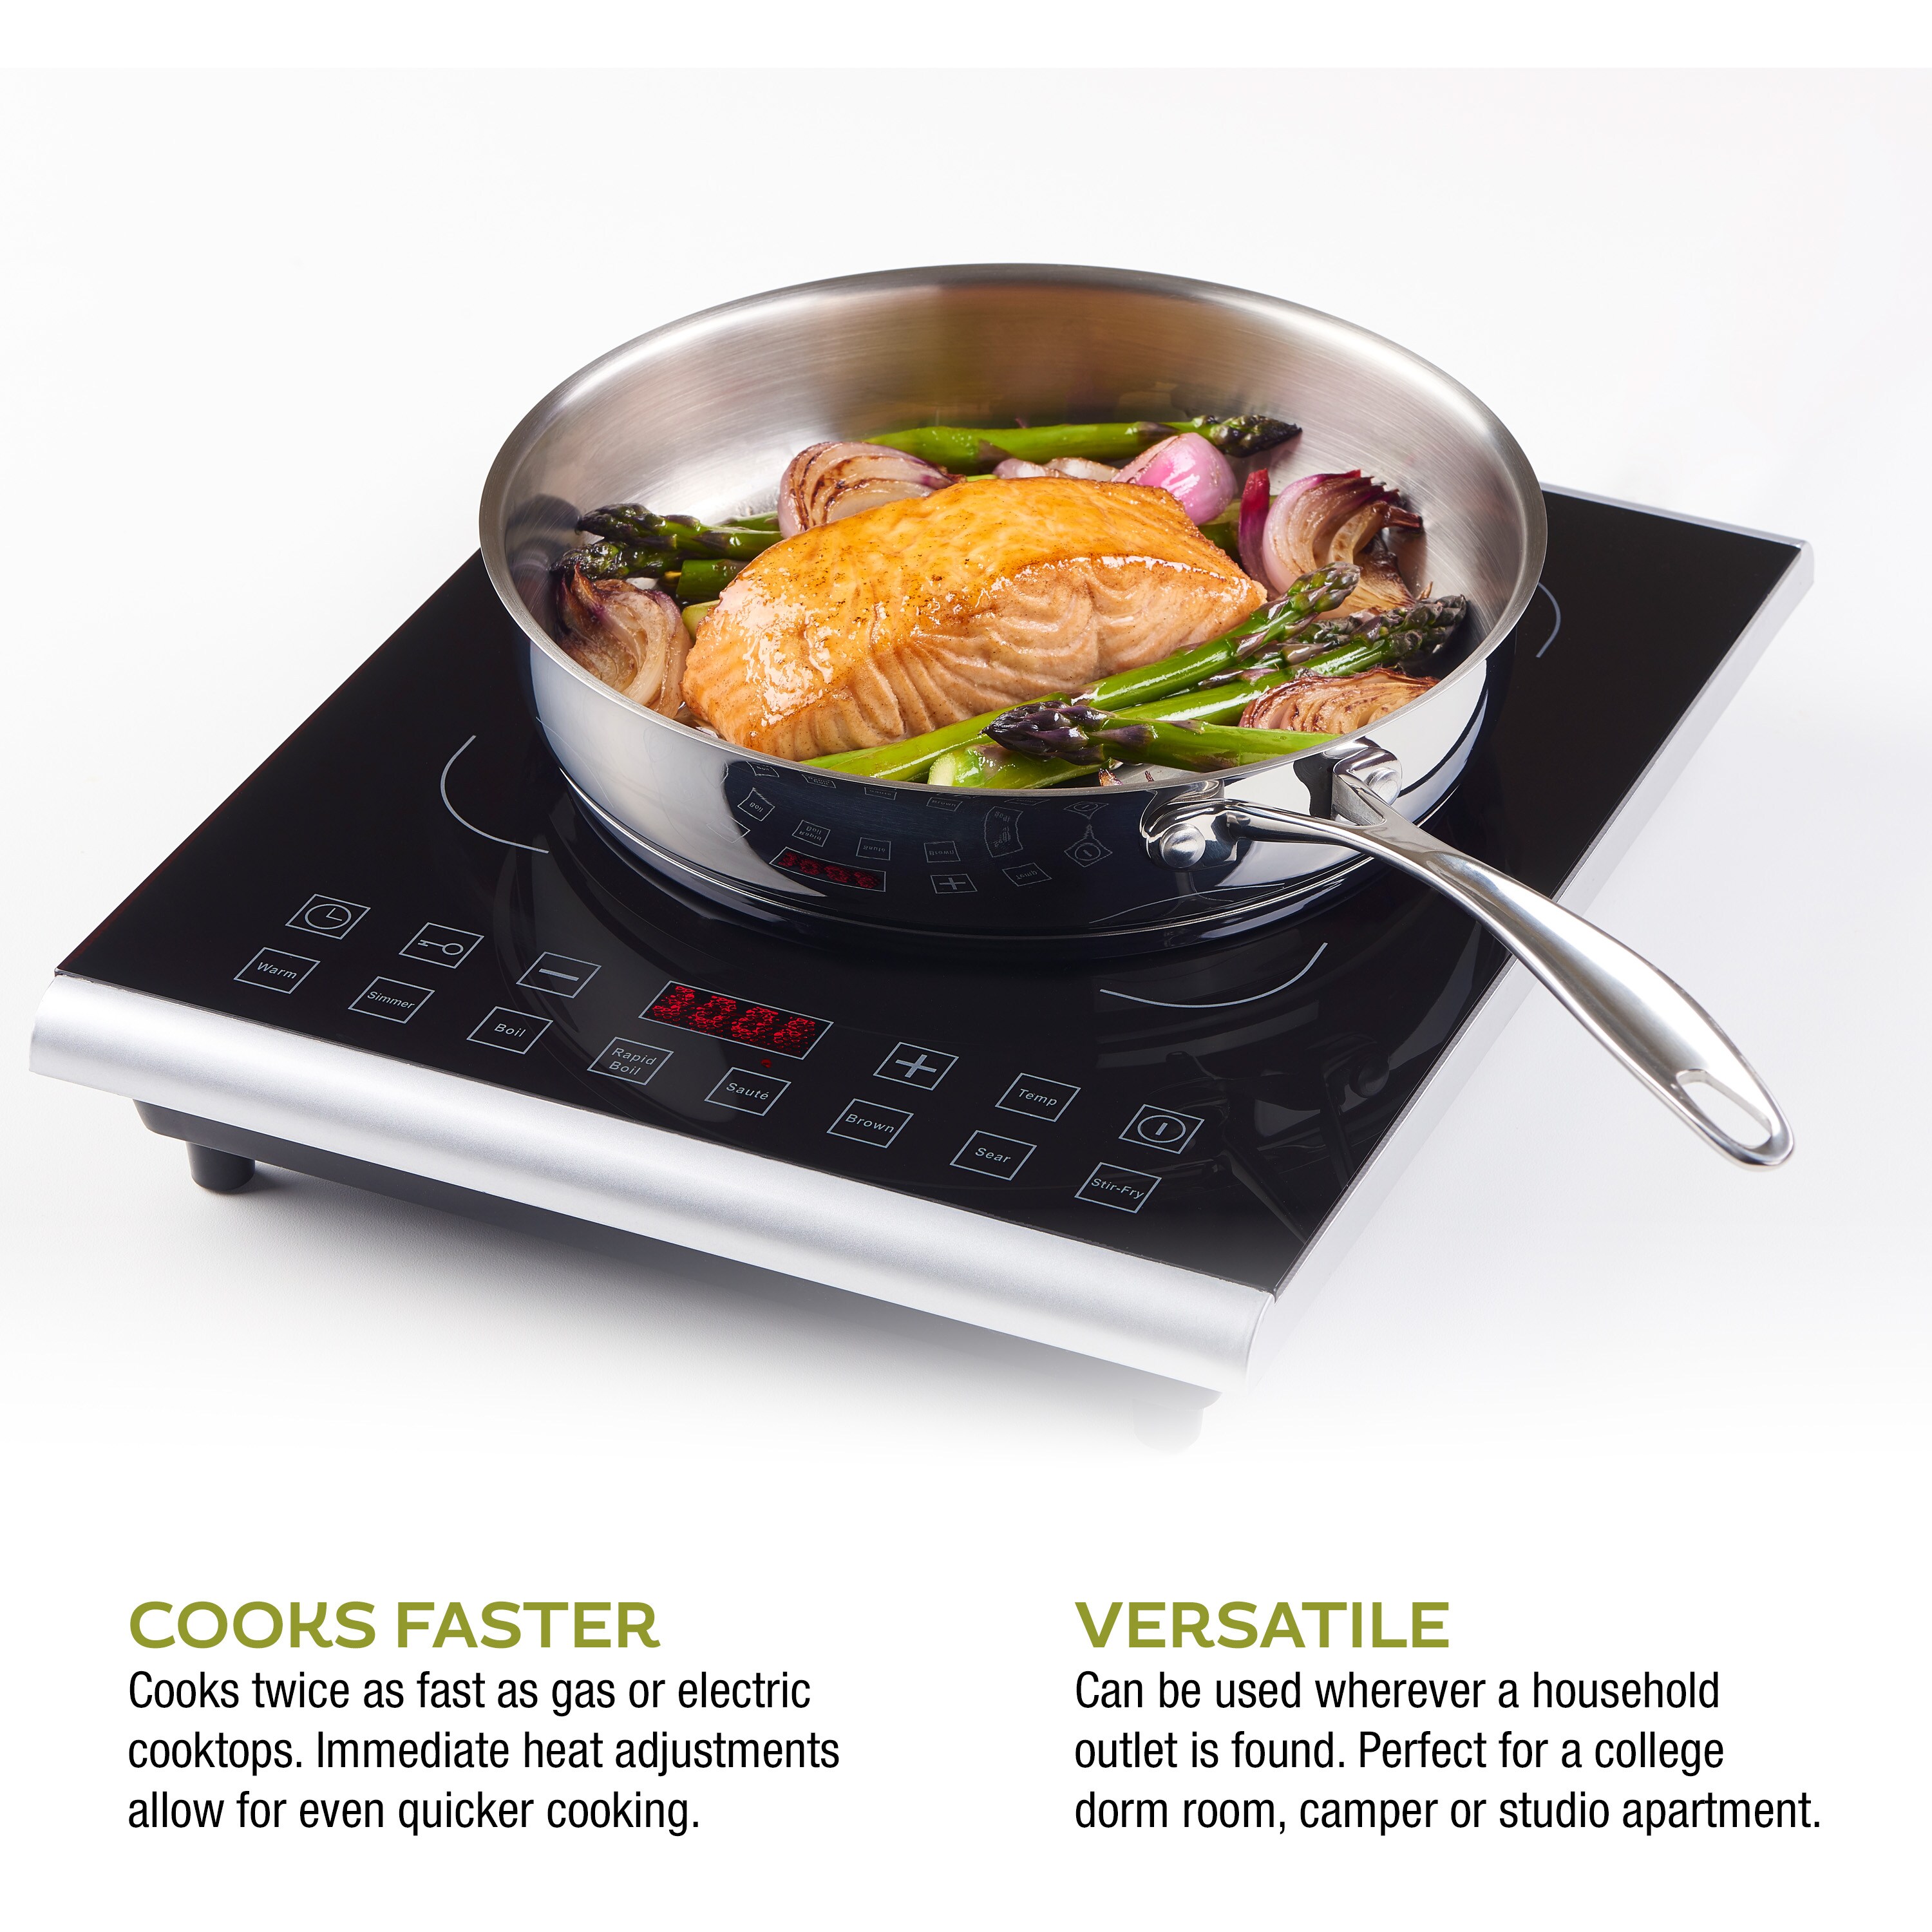 Ciarra CATIH1 1800W Portable Induction Cooktop, Ultra Slim Single Electric Countertop Burner with Sensor Touch and Digital Timer